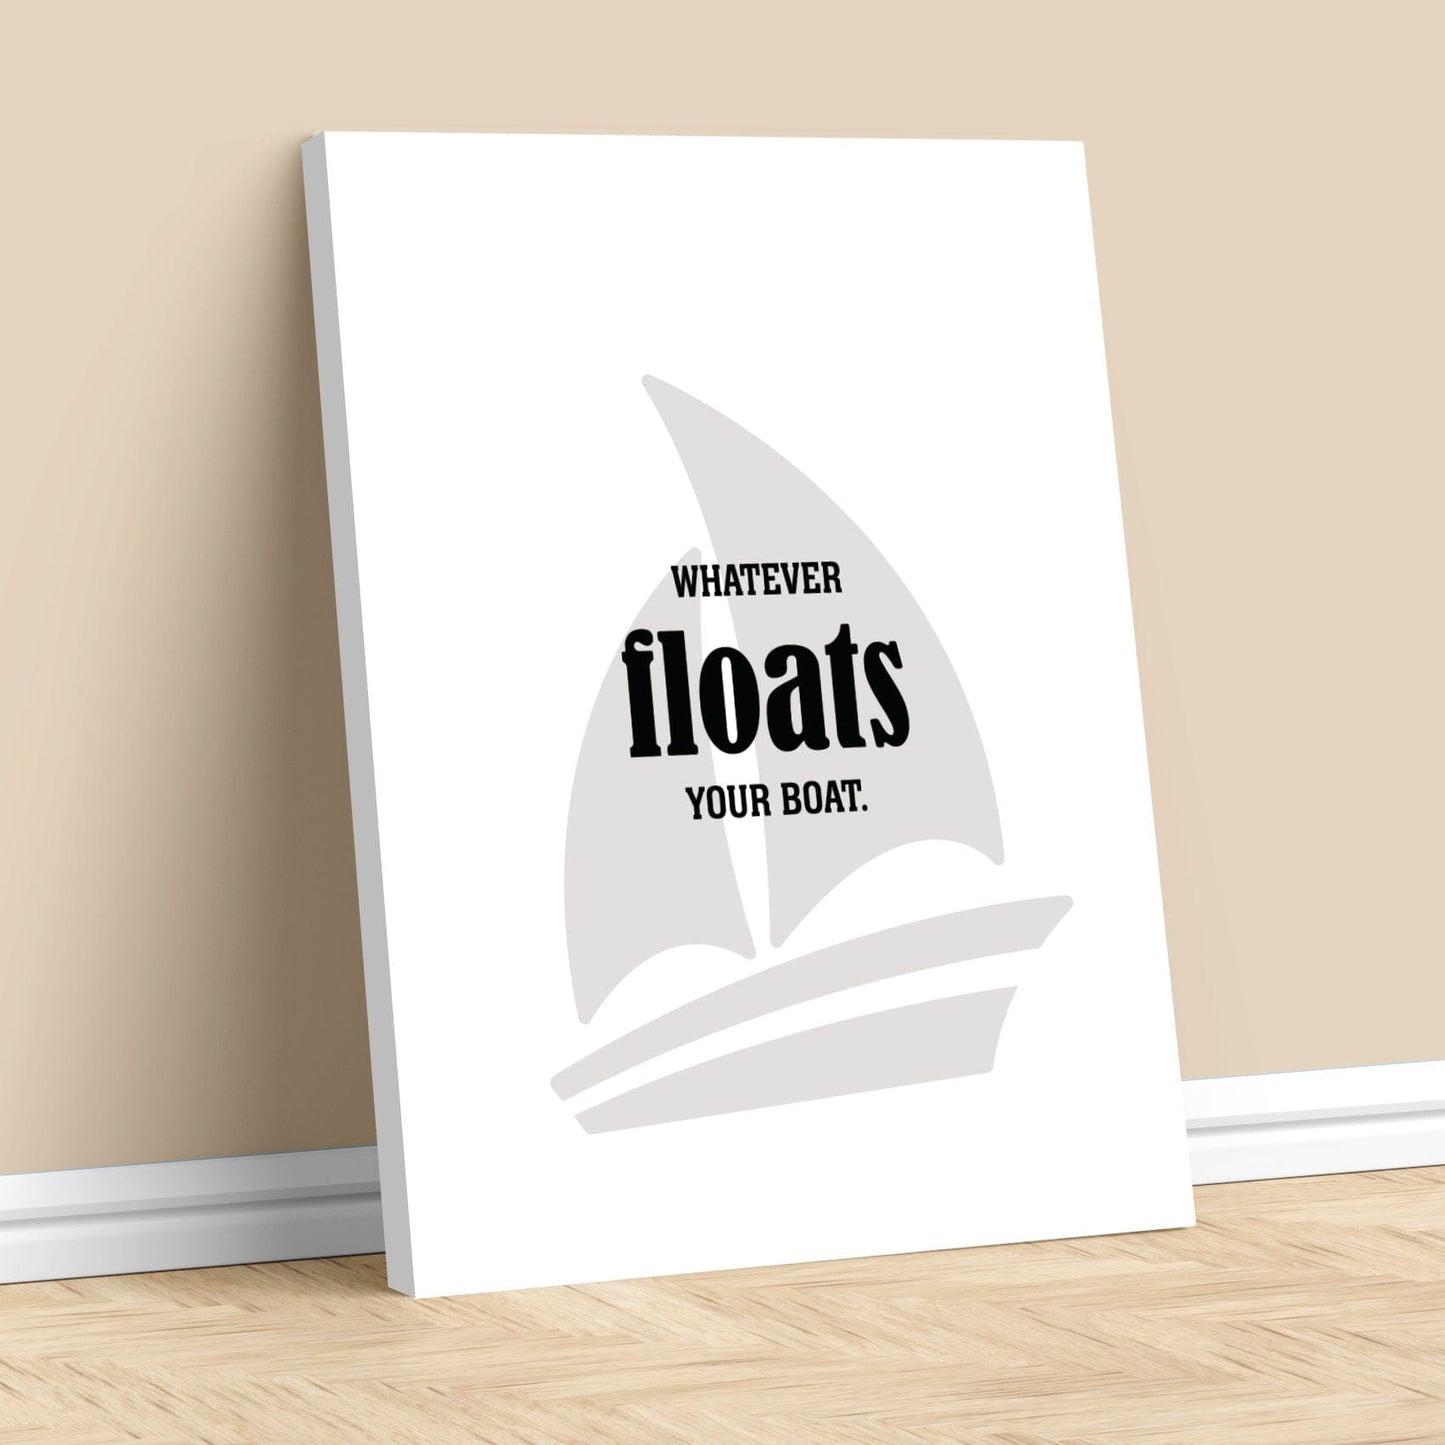 Whatever Floats Your Boat - Wise and Witty Wall Print Art Wise and Wiseass Quotes Song Lyrics Art 11x14 Canvas Wrap 